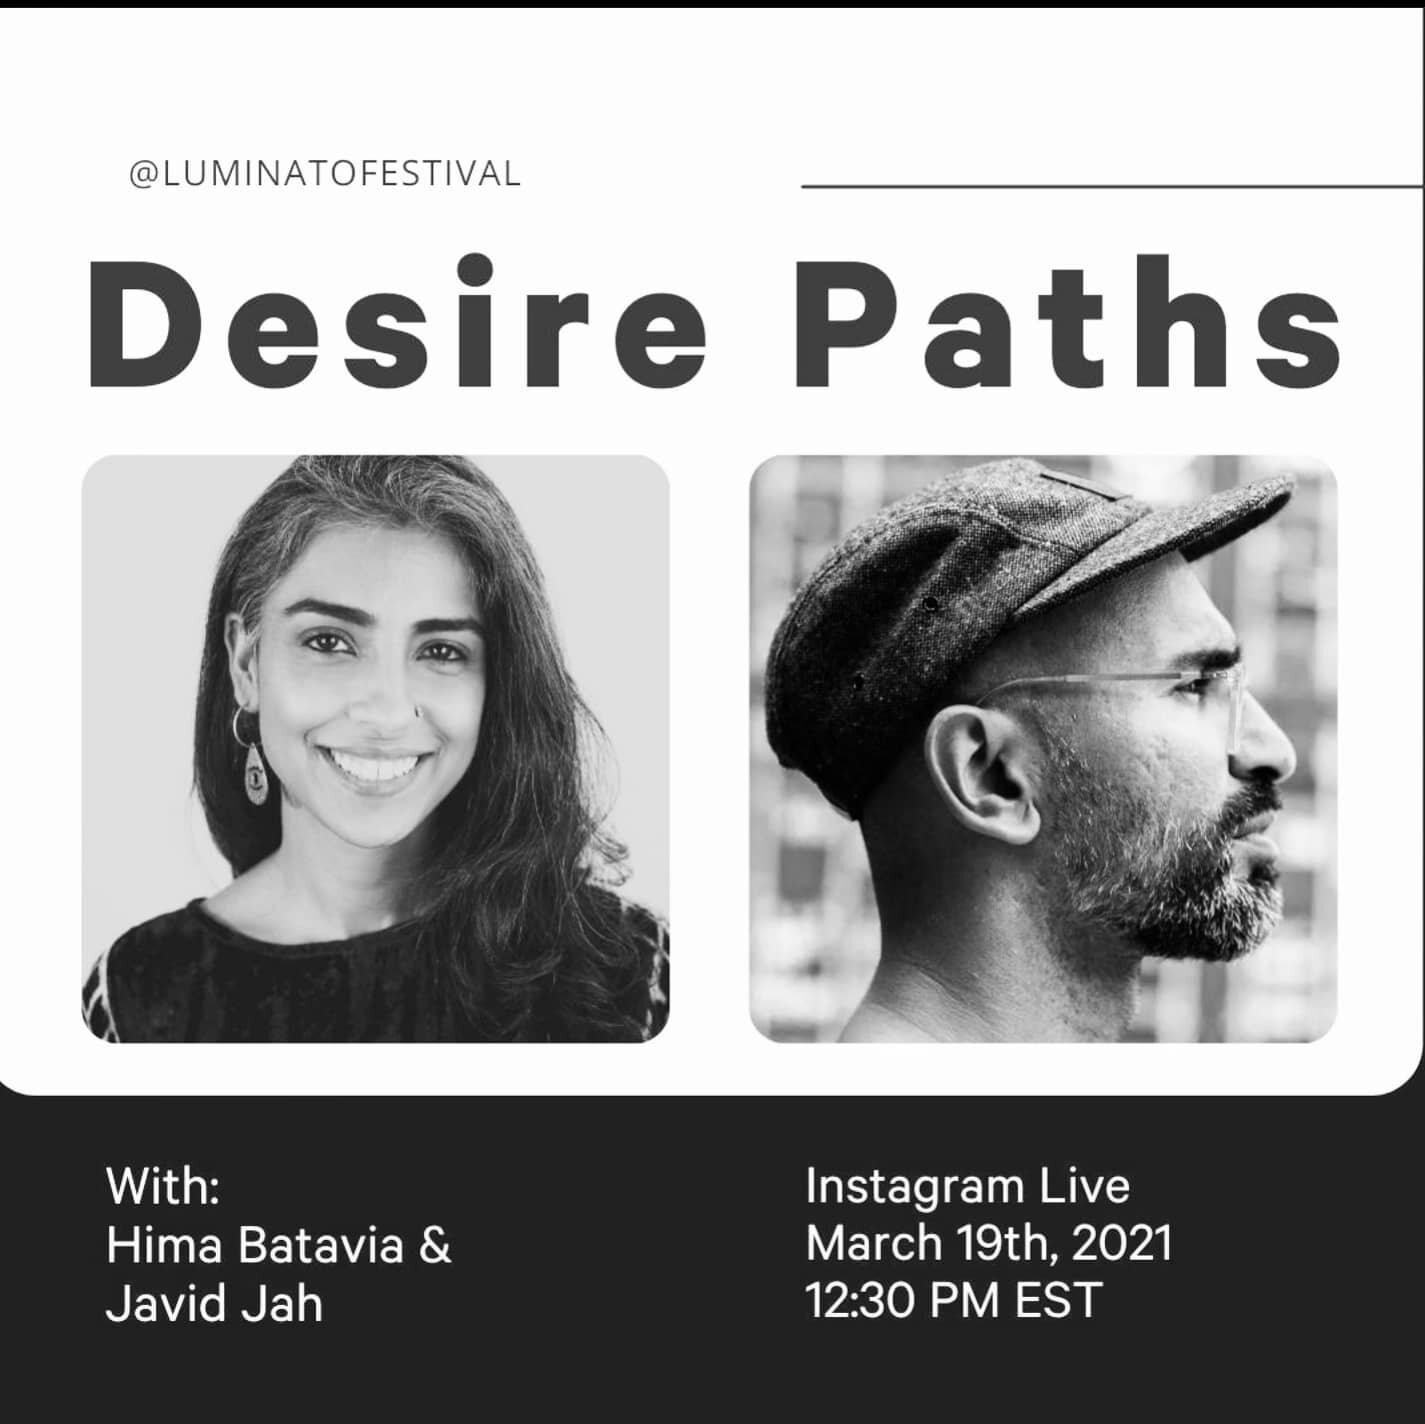 If you are interested in a discussion on the future of sacred spaces in the city, I'm doing an Instagram live conversation tomorrow at 12:30pm with @hima_batavia who curated the audiobook series called Desire Paths
*
You can listen to the audiobook n